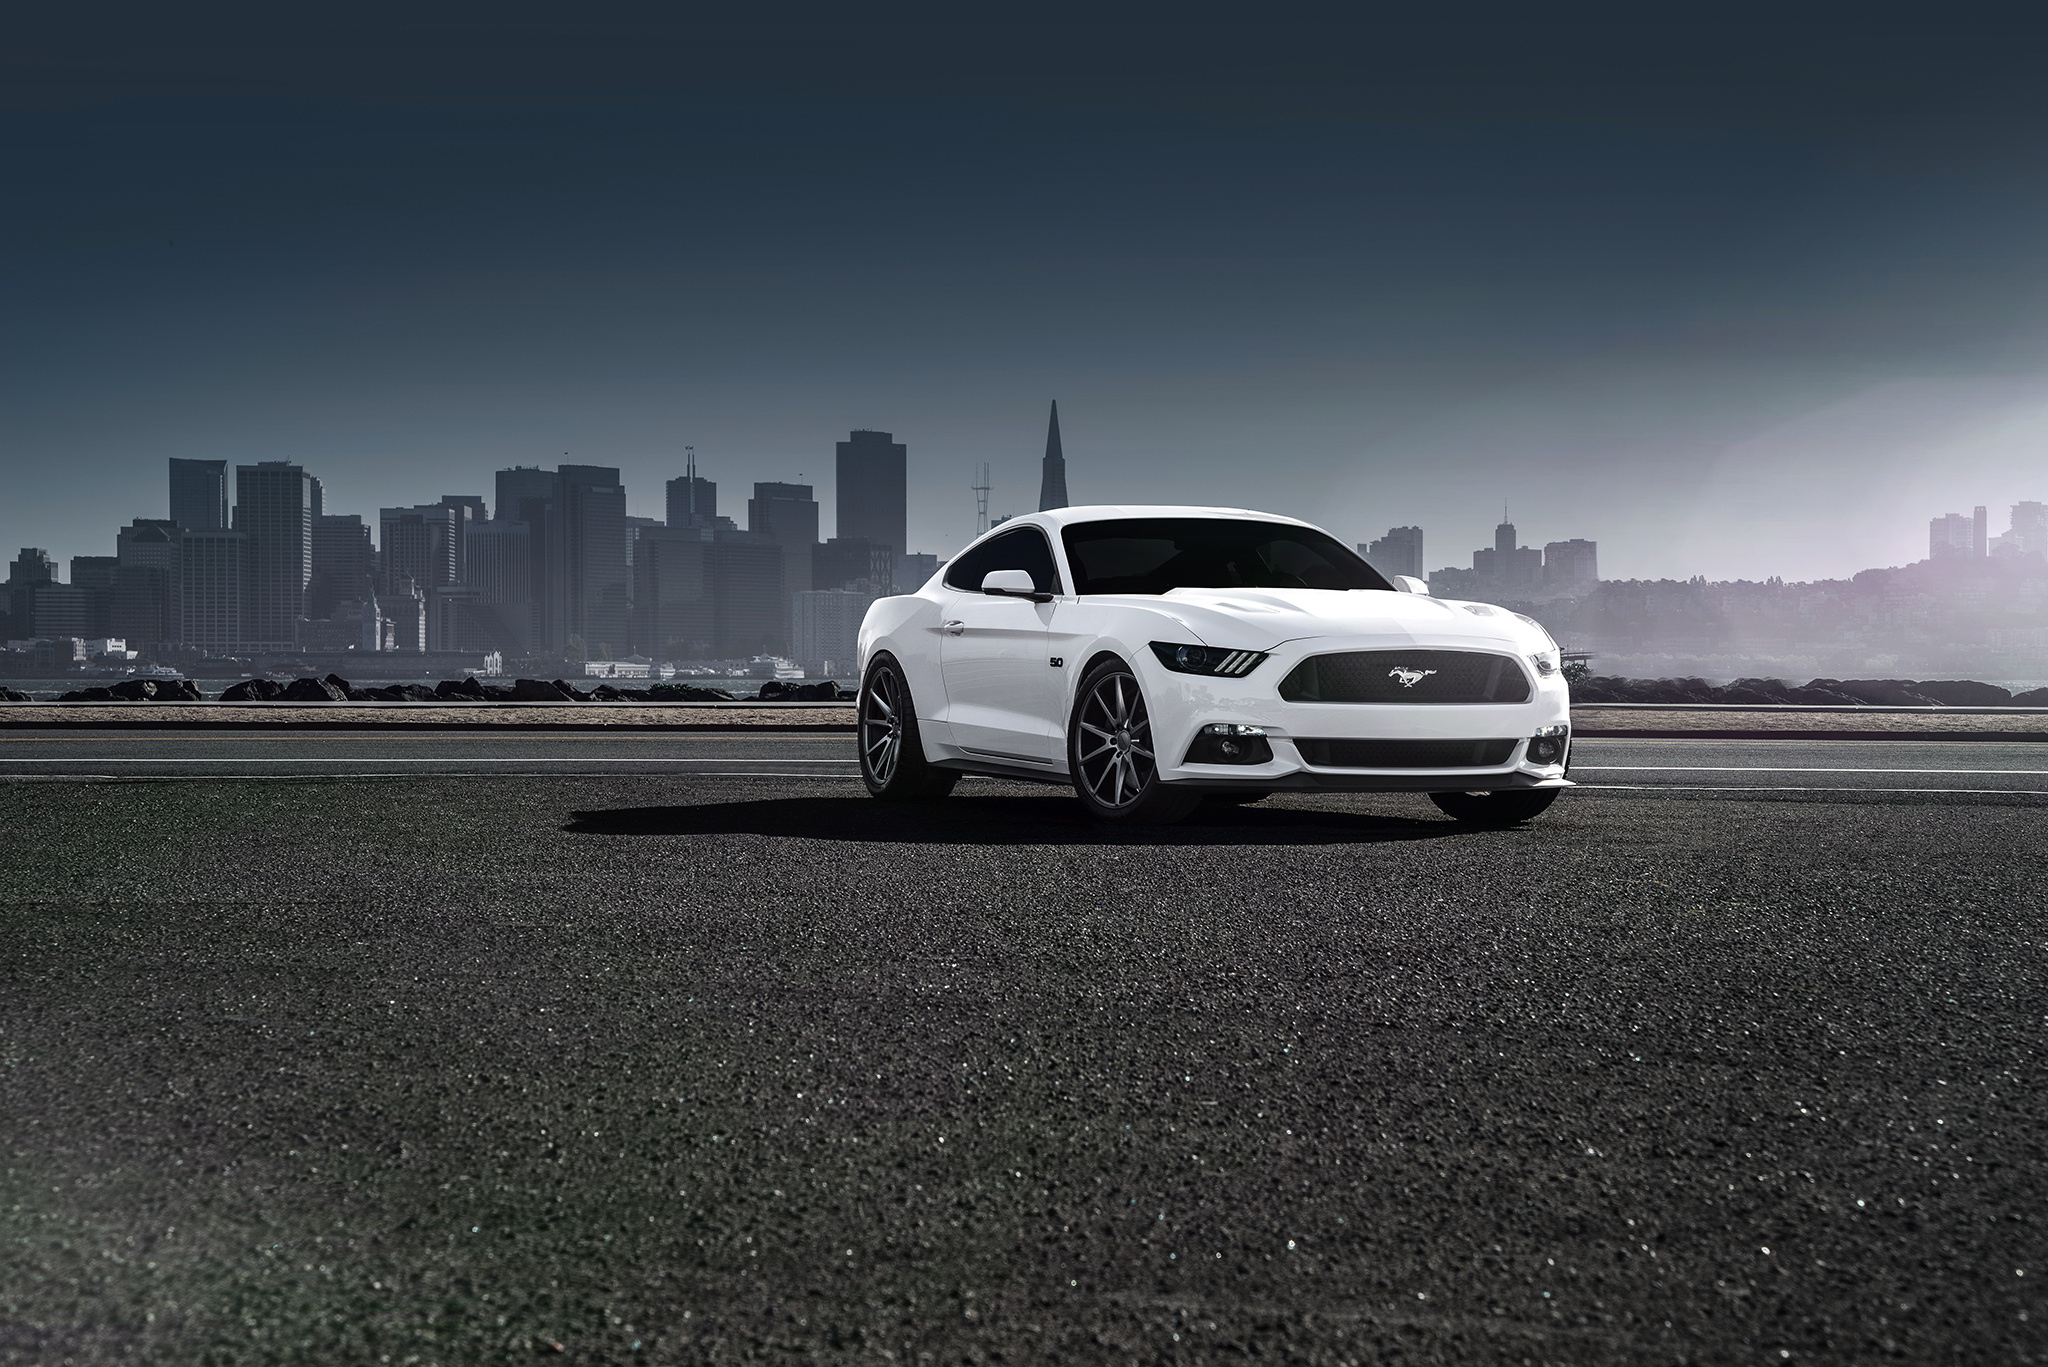 Phone Wallpaper (No watermarks) cars, mustang, white, side view